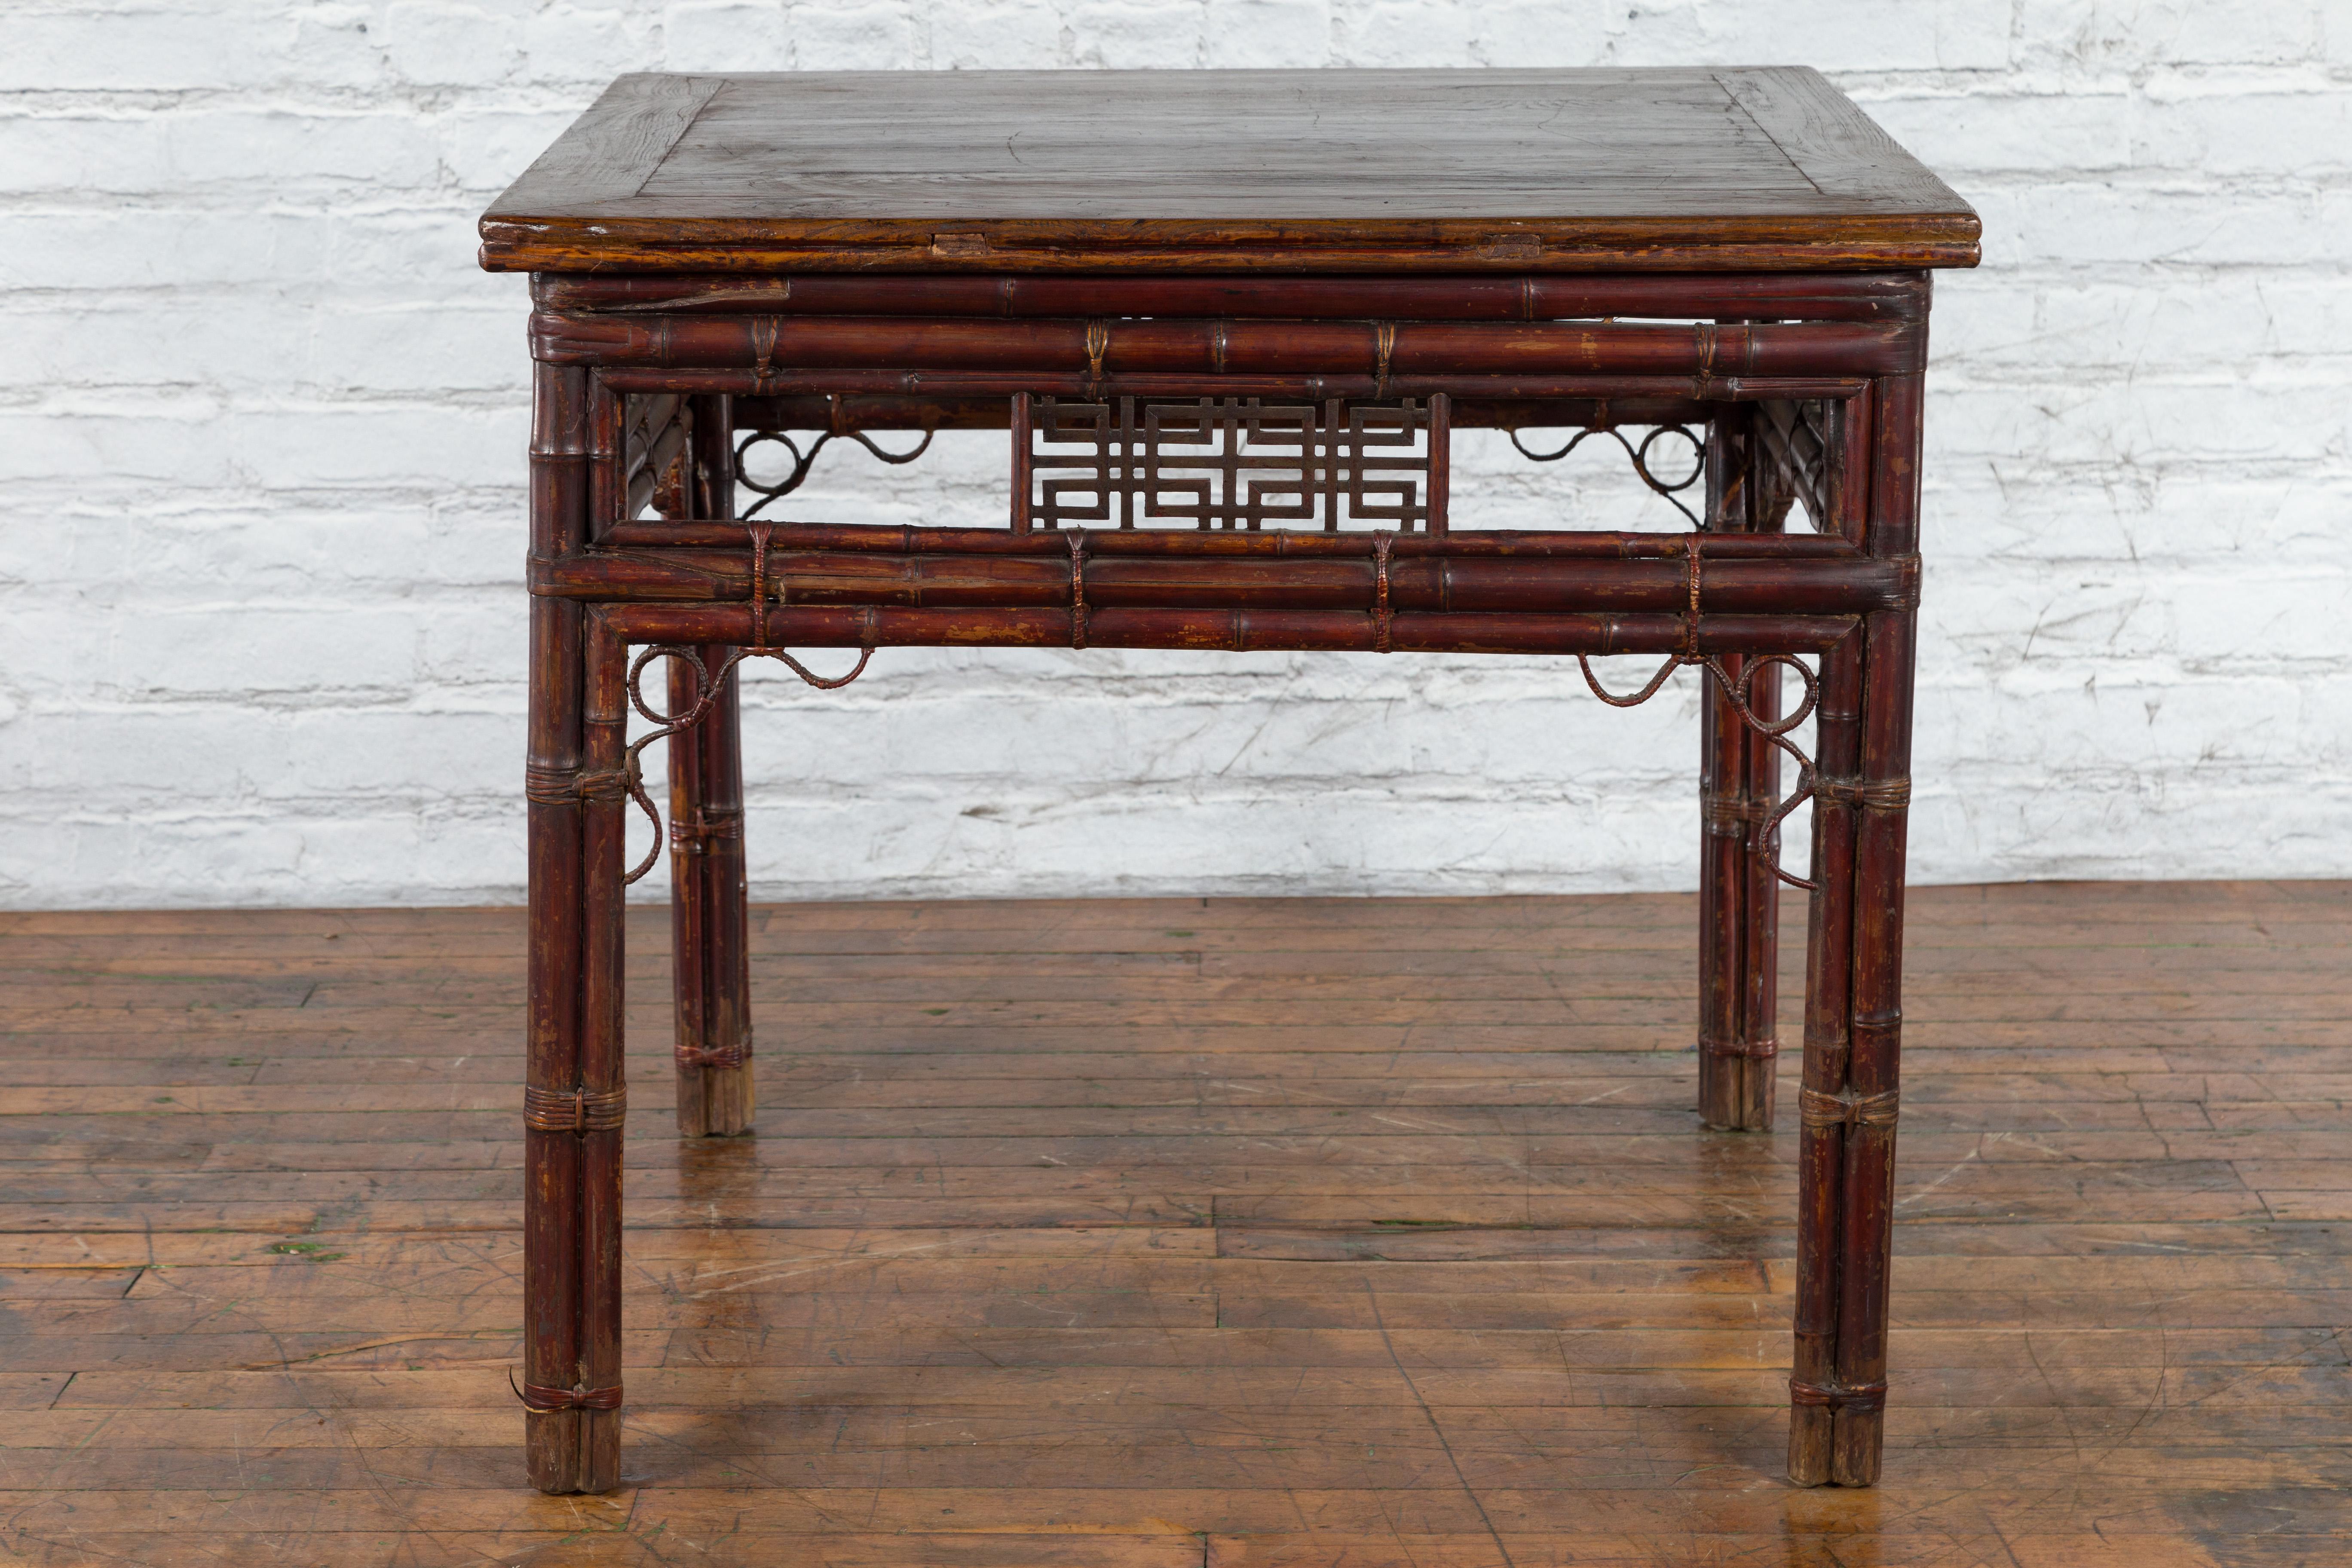 A Chinese bamboo and elm wine table from the early 20th century with fretwork motifs. Created in China during the early years of the 20th century, this wine table features a square elm top with central board, sitting above a rustic bamboo base. The